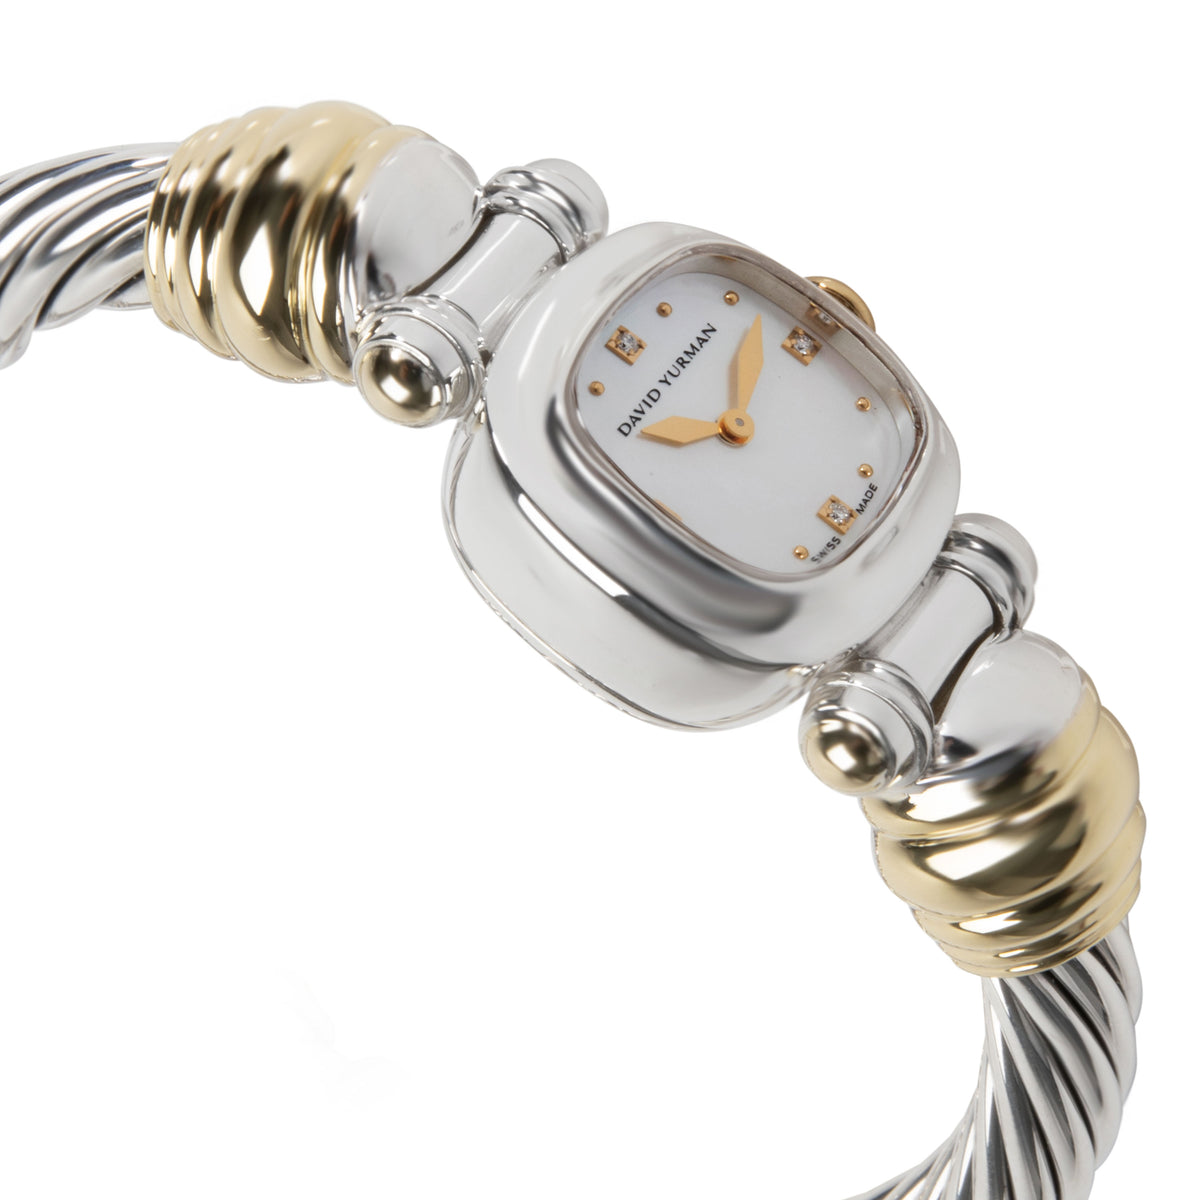 David Yurman Cable Cable Women's Watch in 14KT & 925 Sterling/Gold